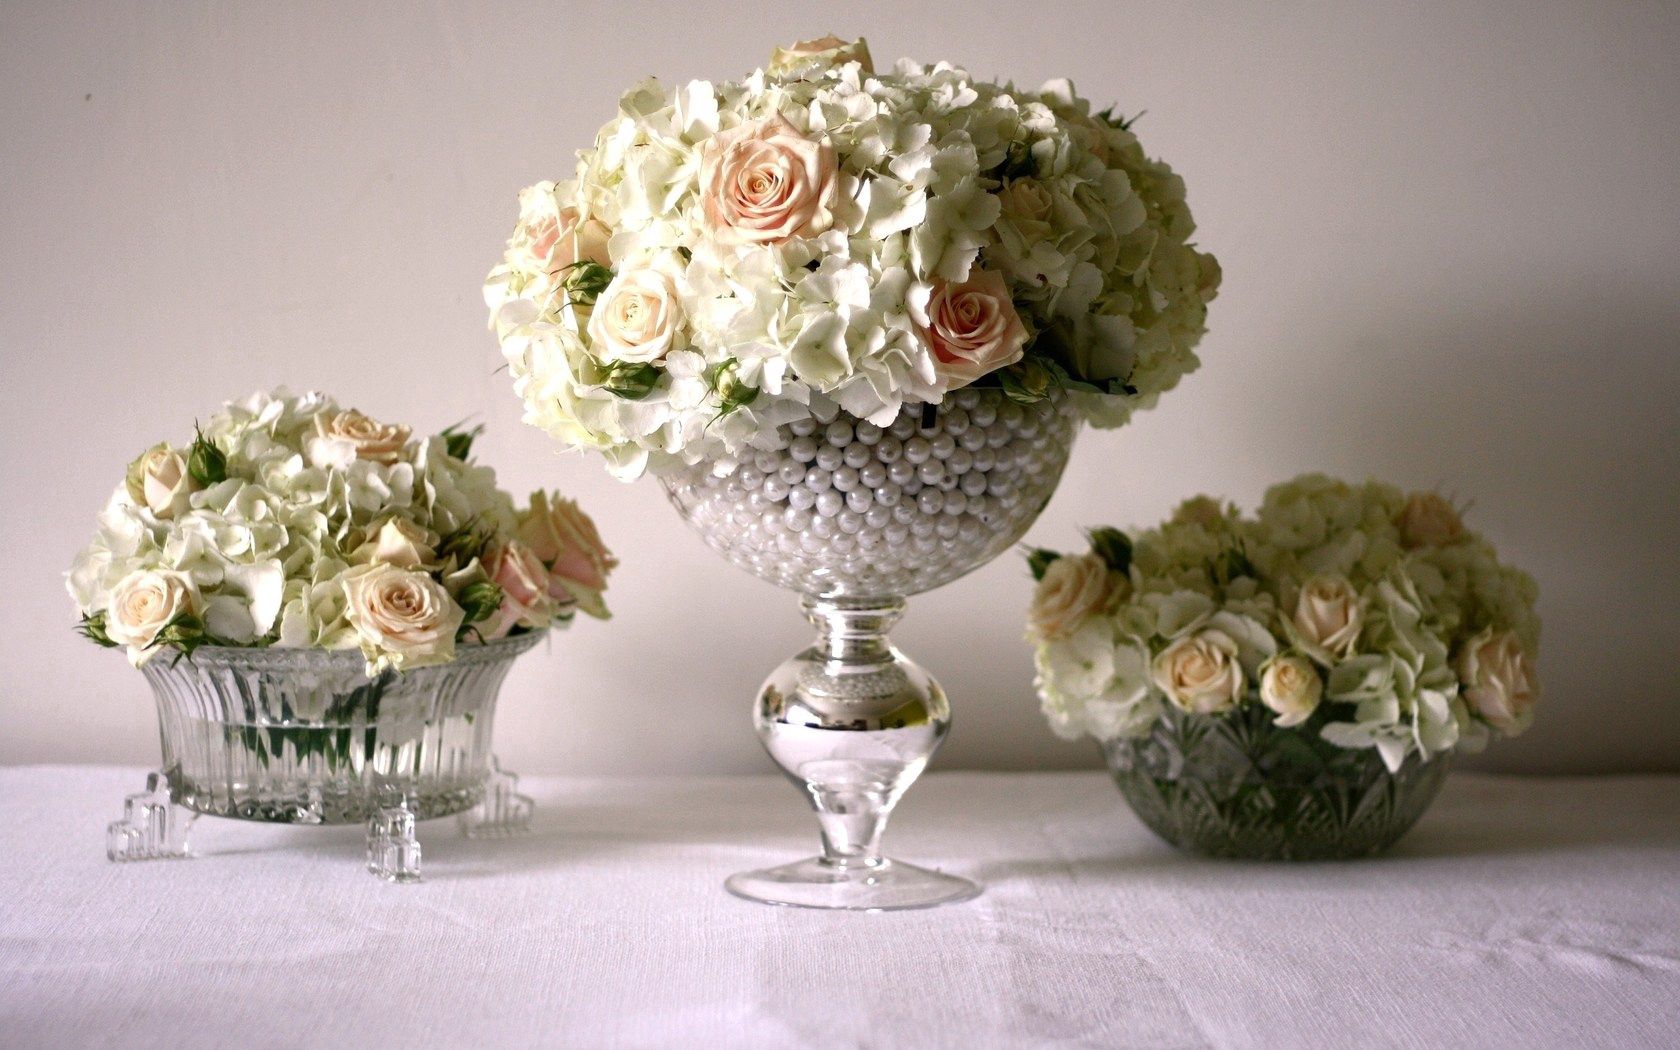 flowers, roses, bouquets, beauty, tenderness, vases